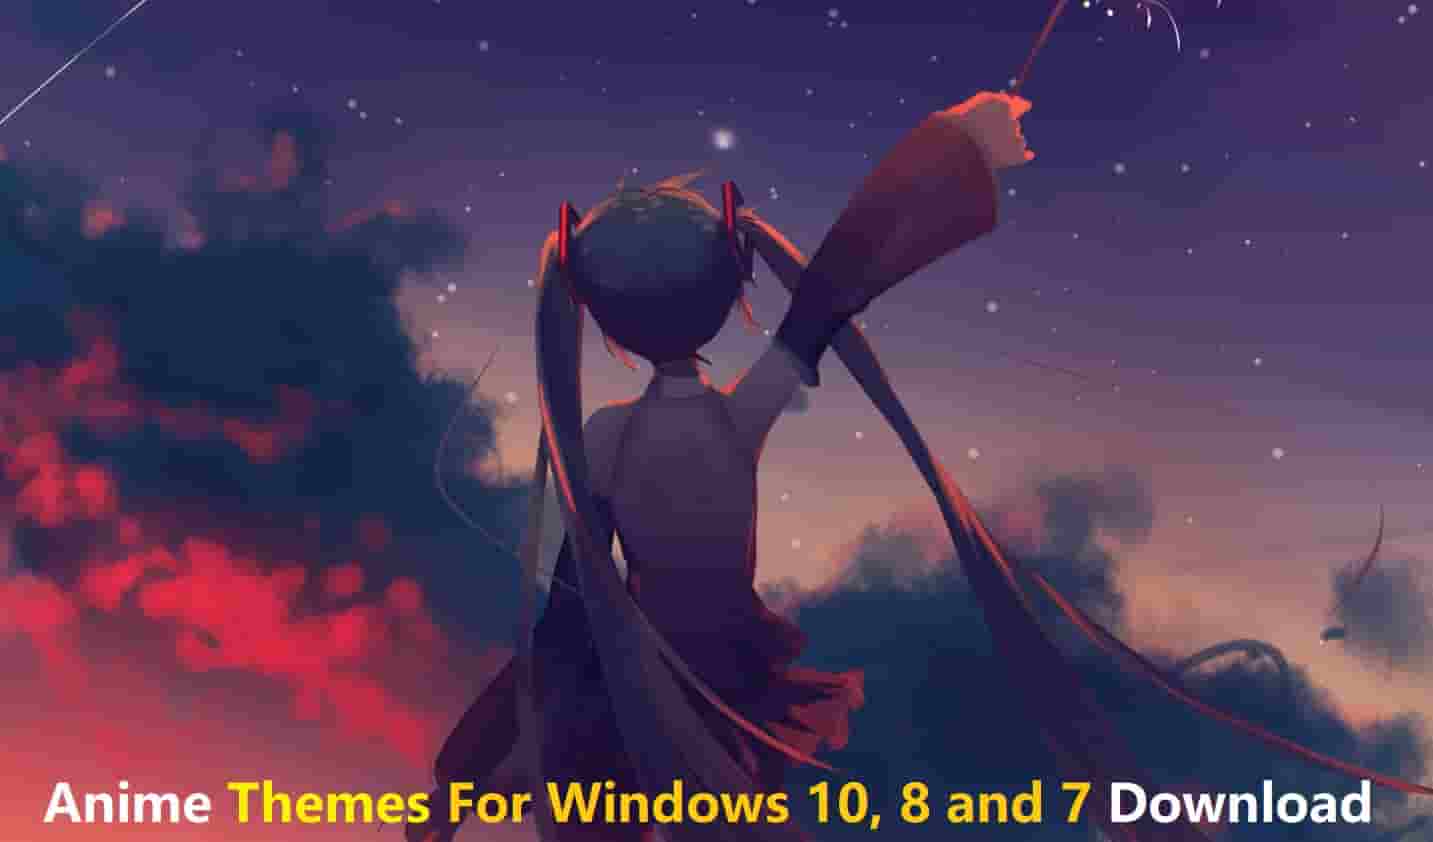 9 Best Anime Themes for Windows 10/11 Free Download 2022 - SecuredYou